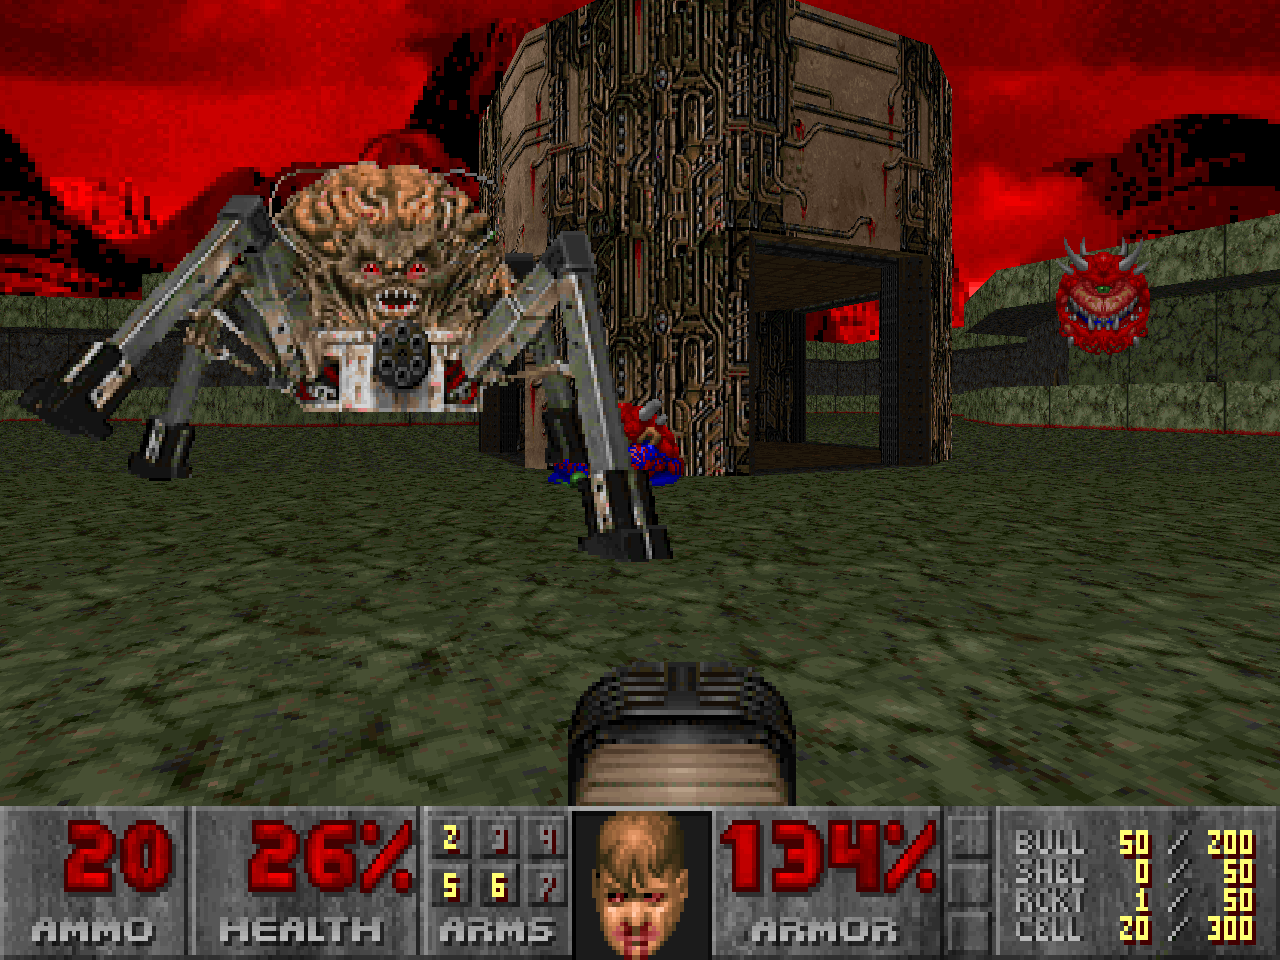 when did the original doom come out